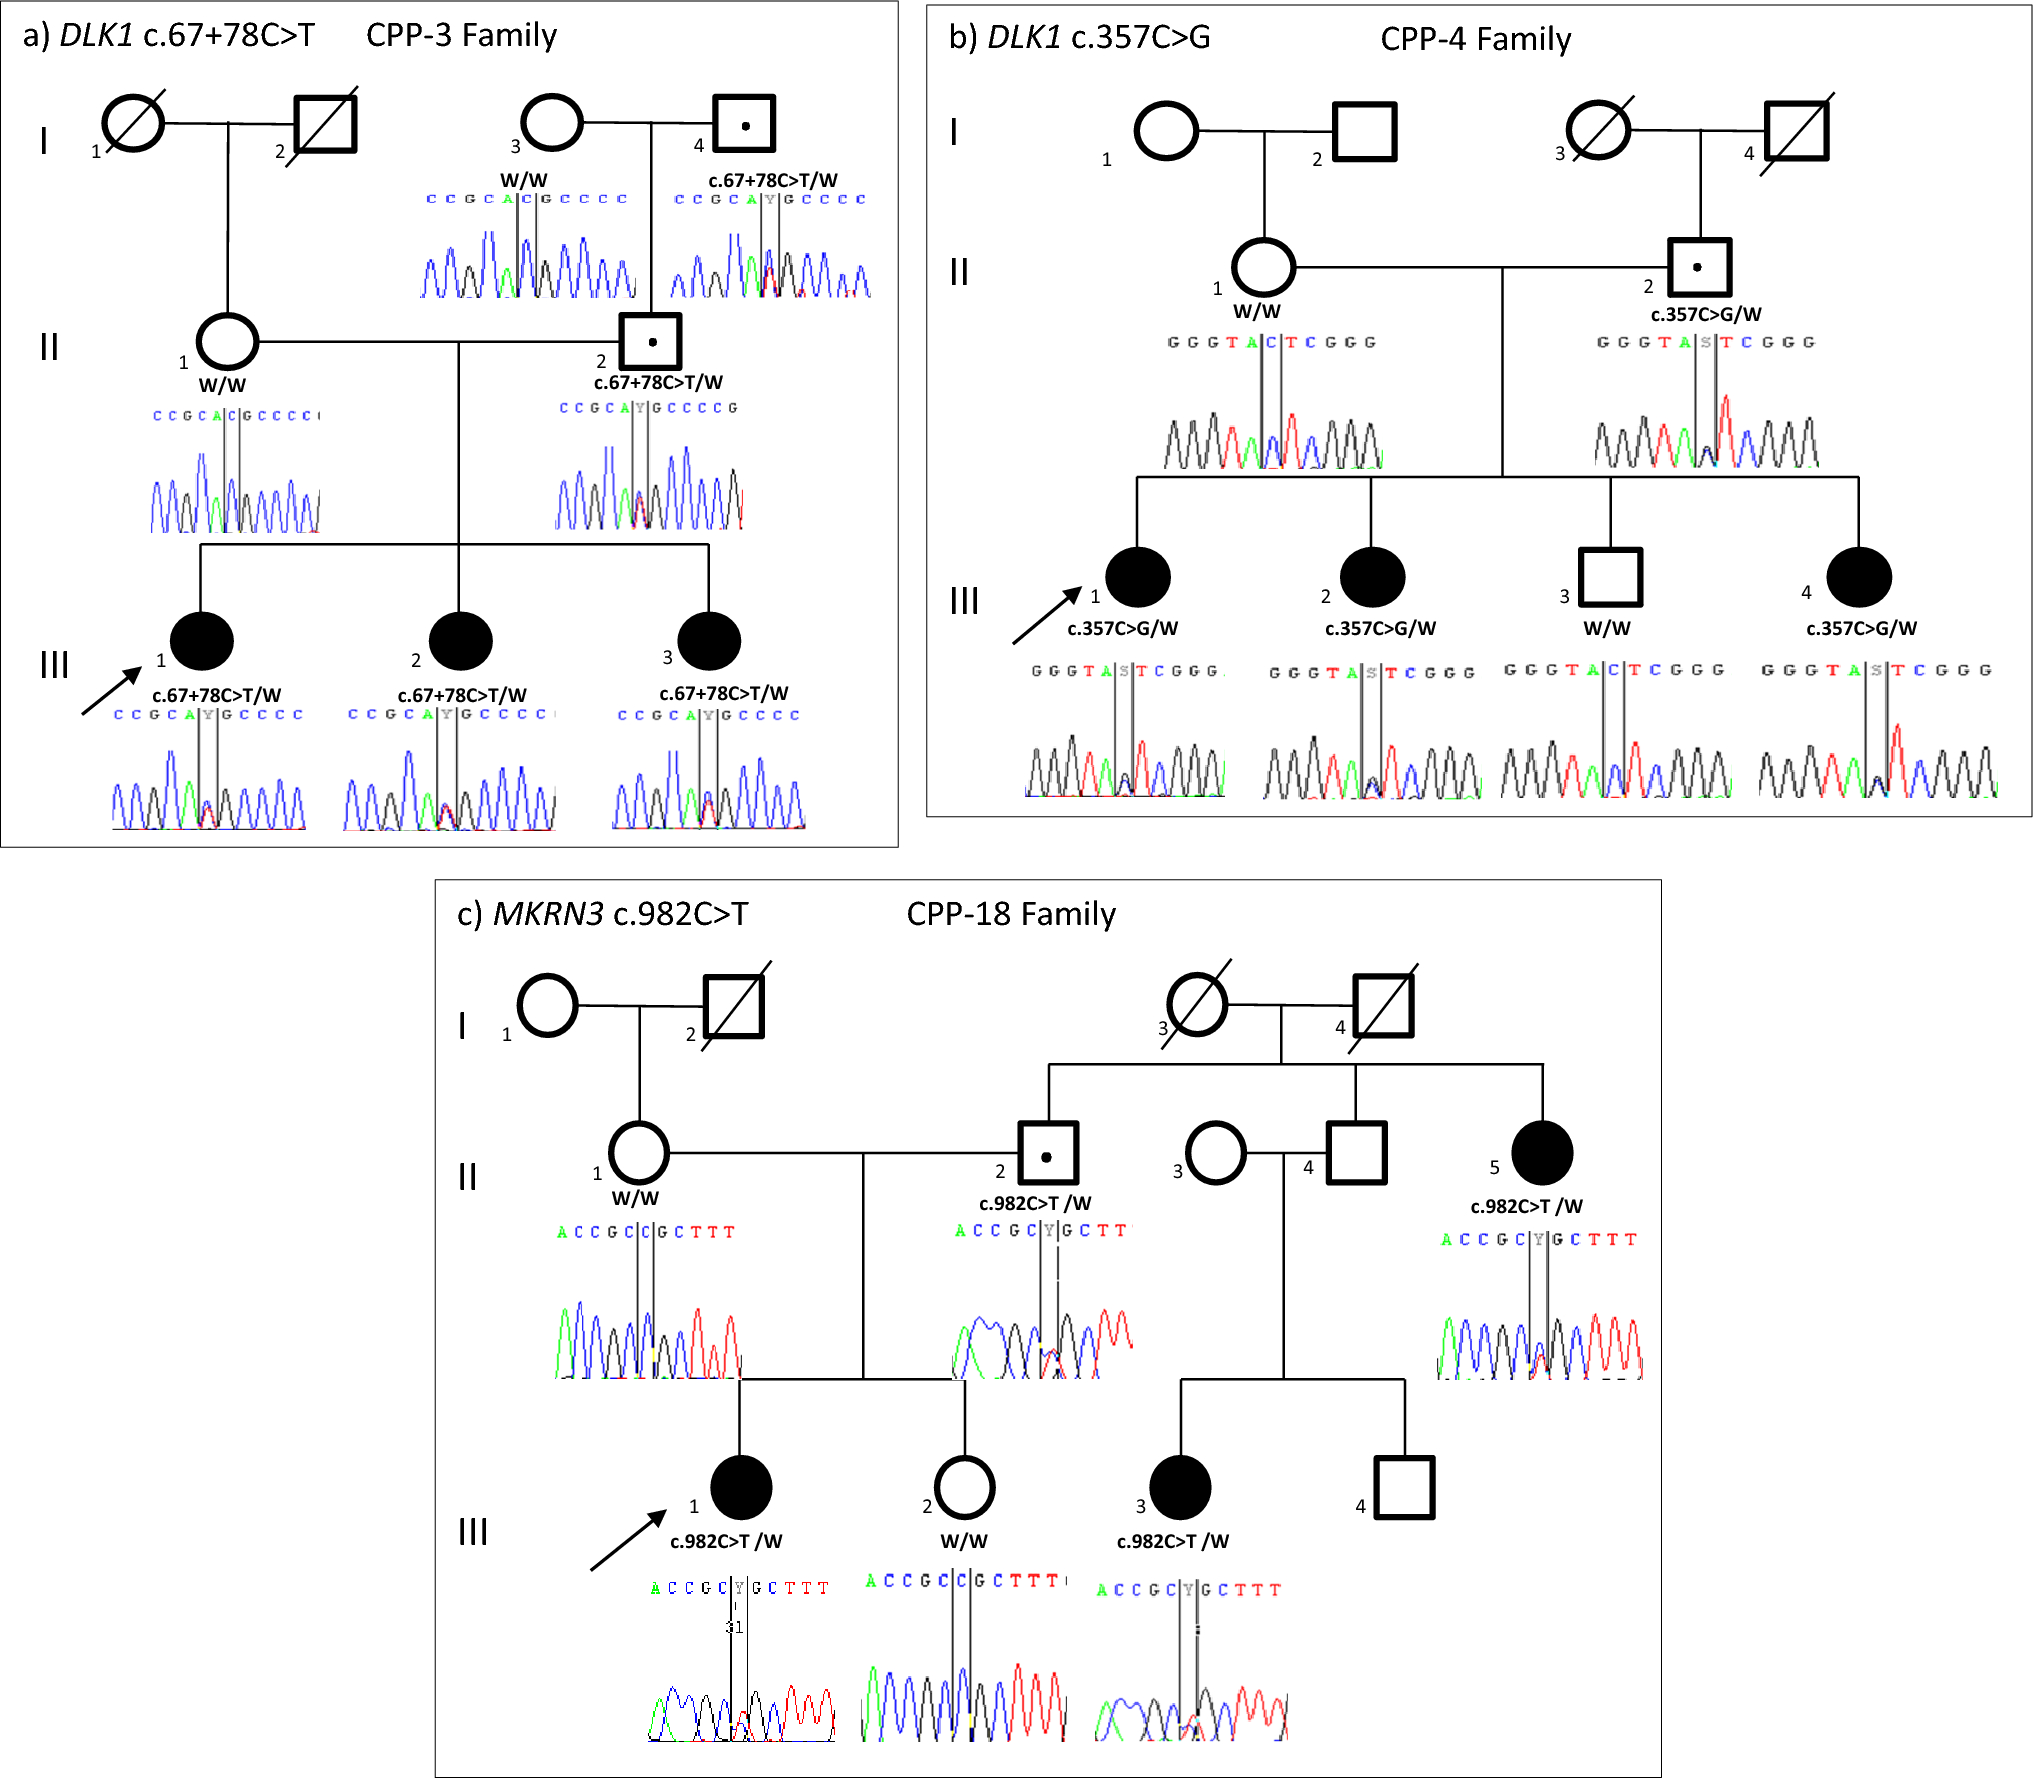 Novel variants ensued genomic imprinting in familial central precocious puberty